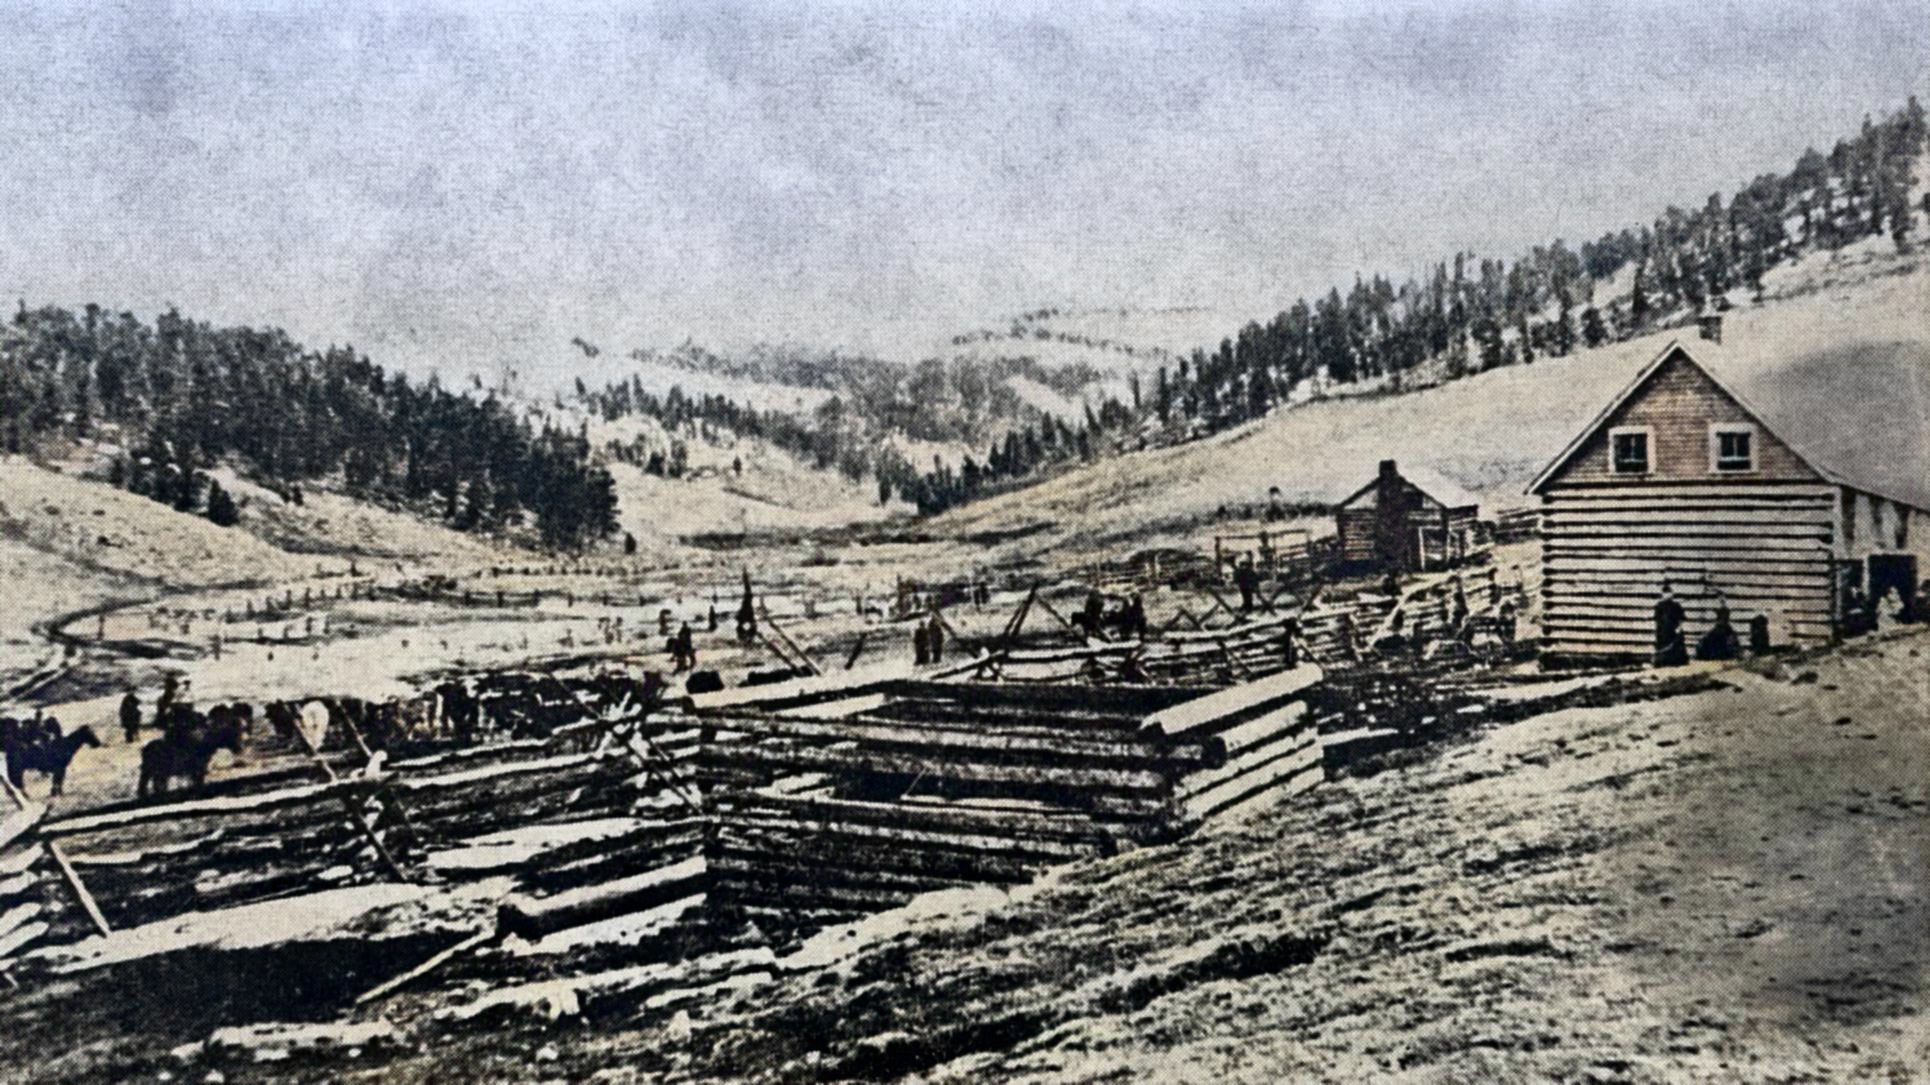 Scene at the Carr Ranch with Cowboys, Cattle and Structures